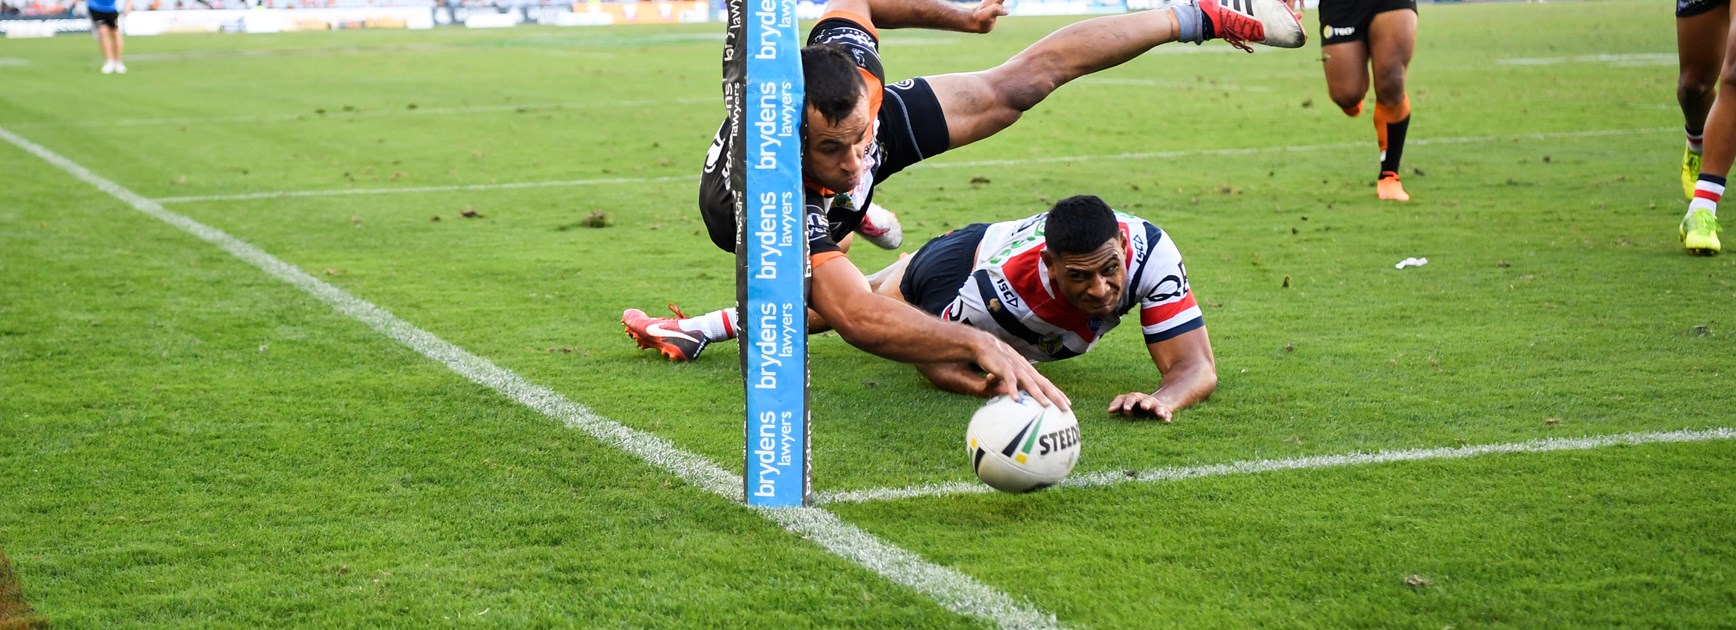 Corey Thompson scores the winning try in his Wests Tigers debut in 2018.